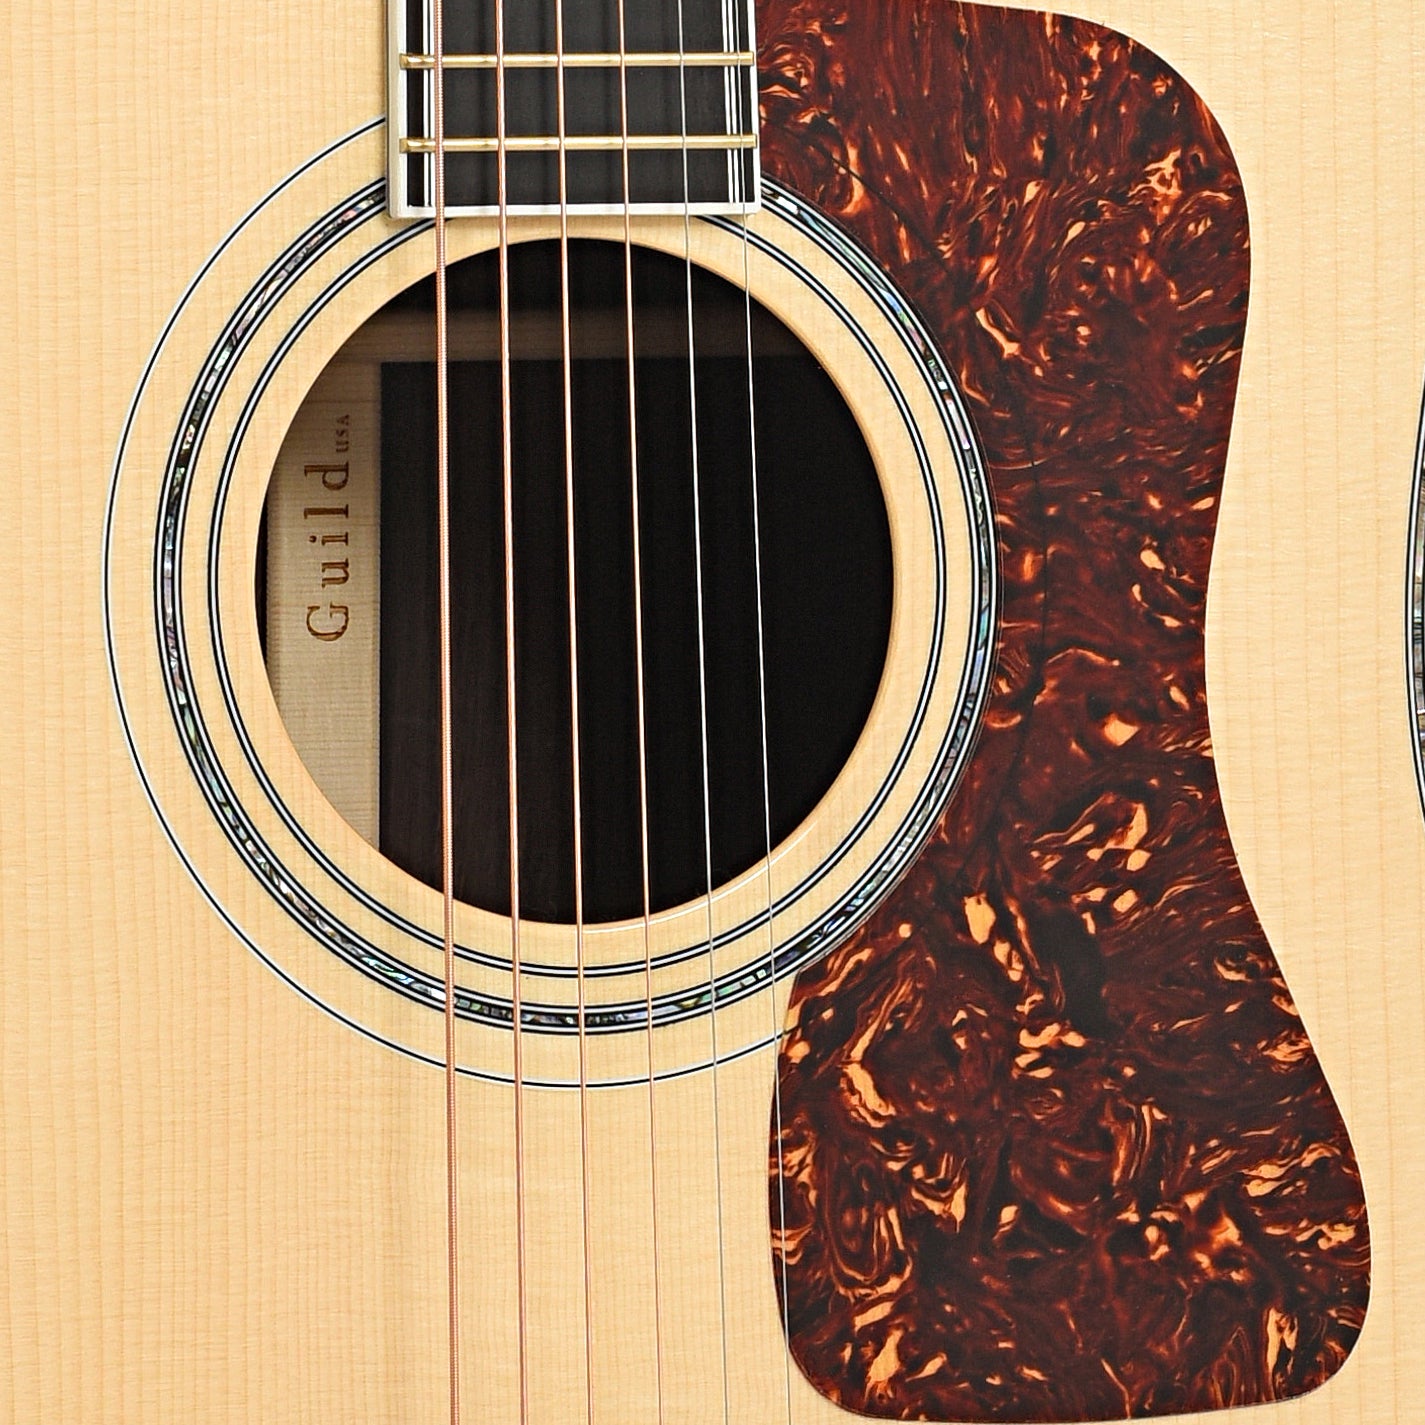 Sound hole and pickguard of Guild GSR D-55 70th Anniversary Limited Edtition Dreadnought Acoustic 